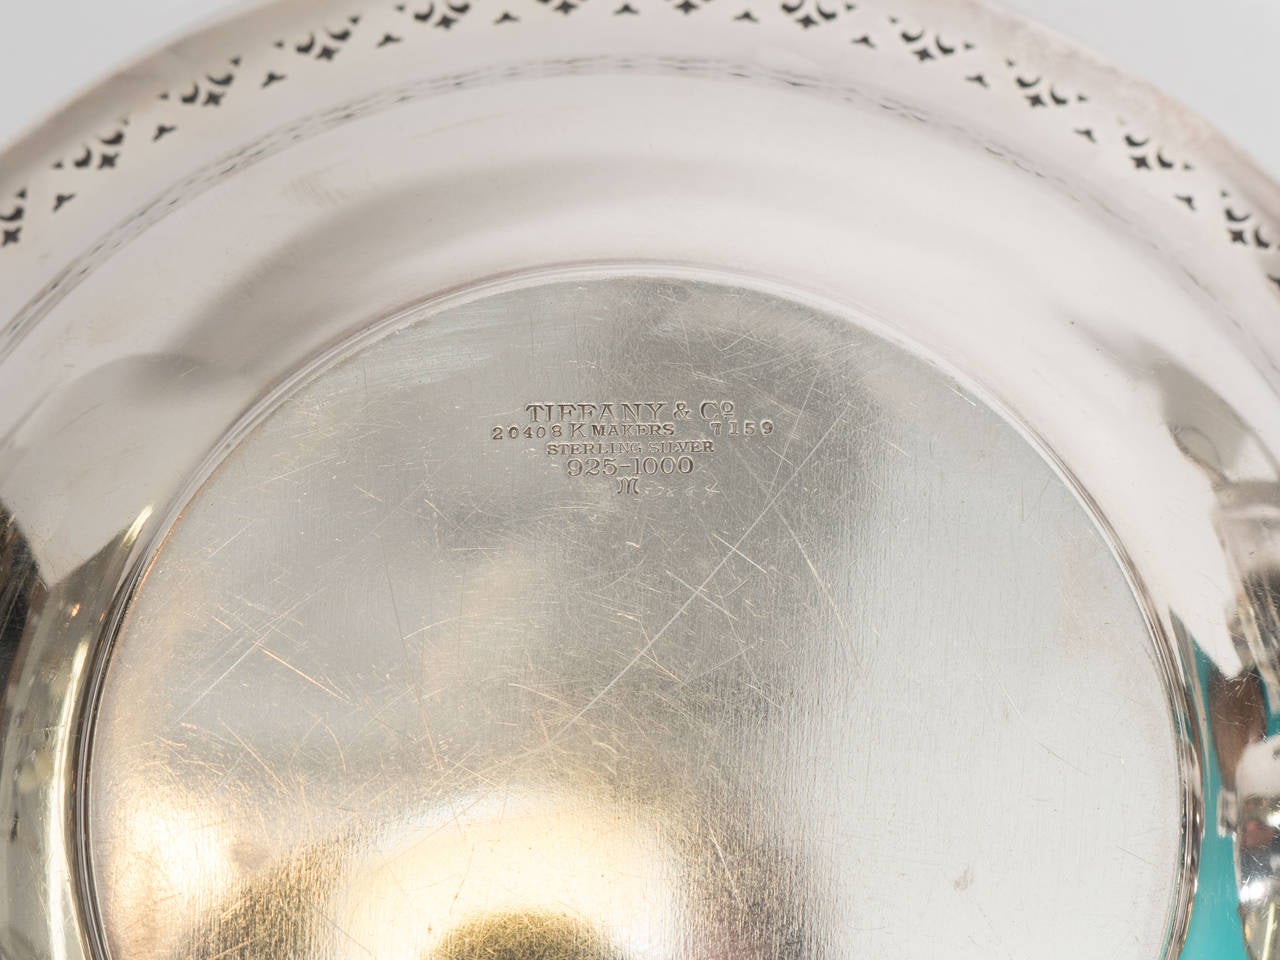 An antique sterling silver pierced edge bowl engraved with initial 